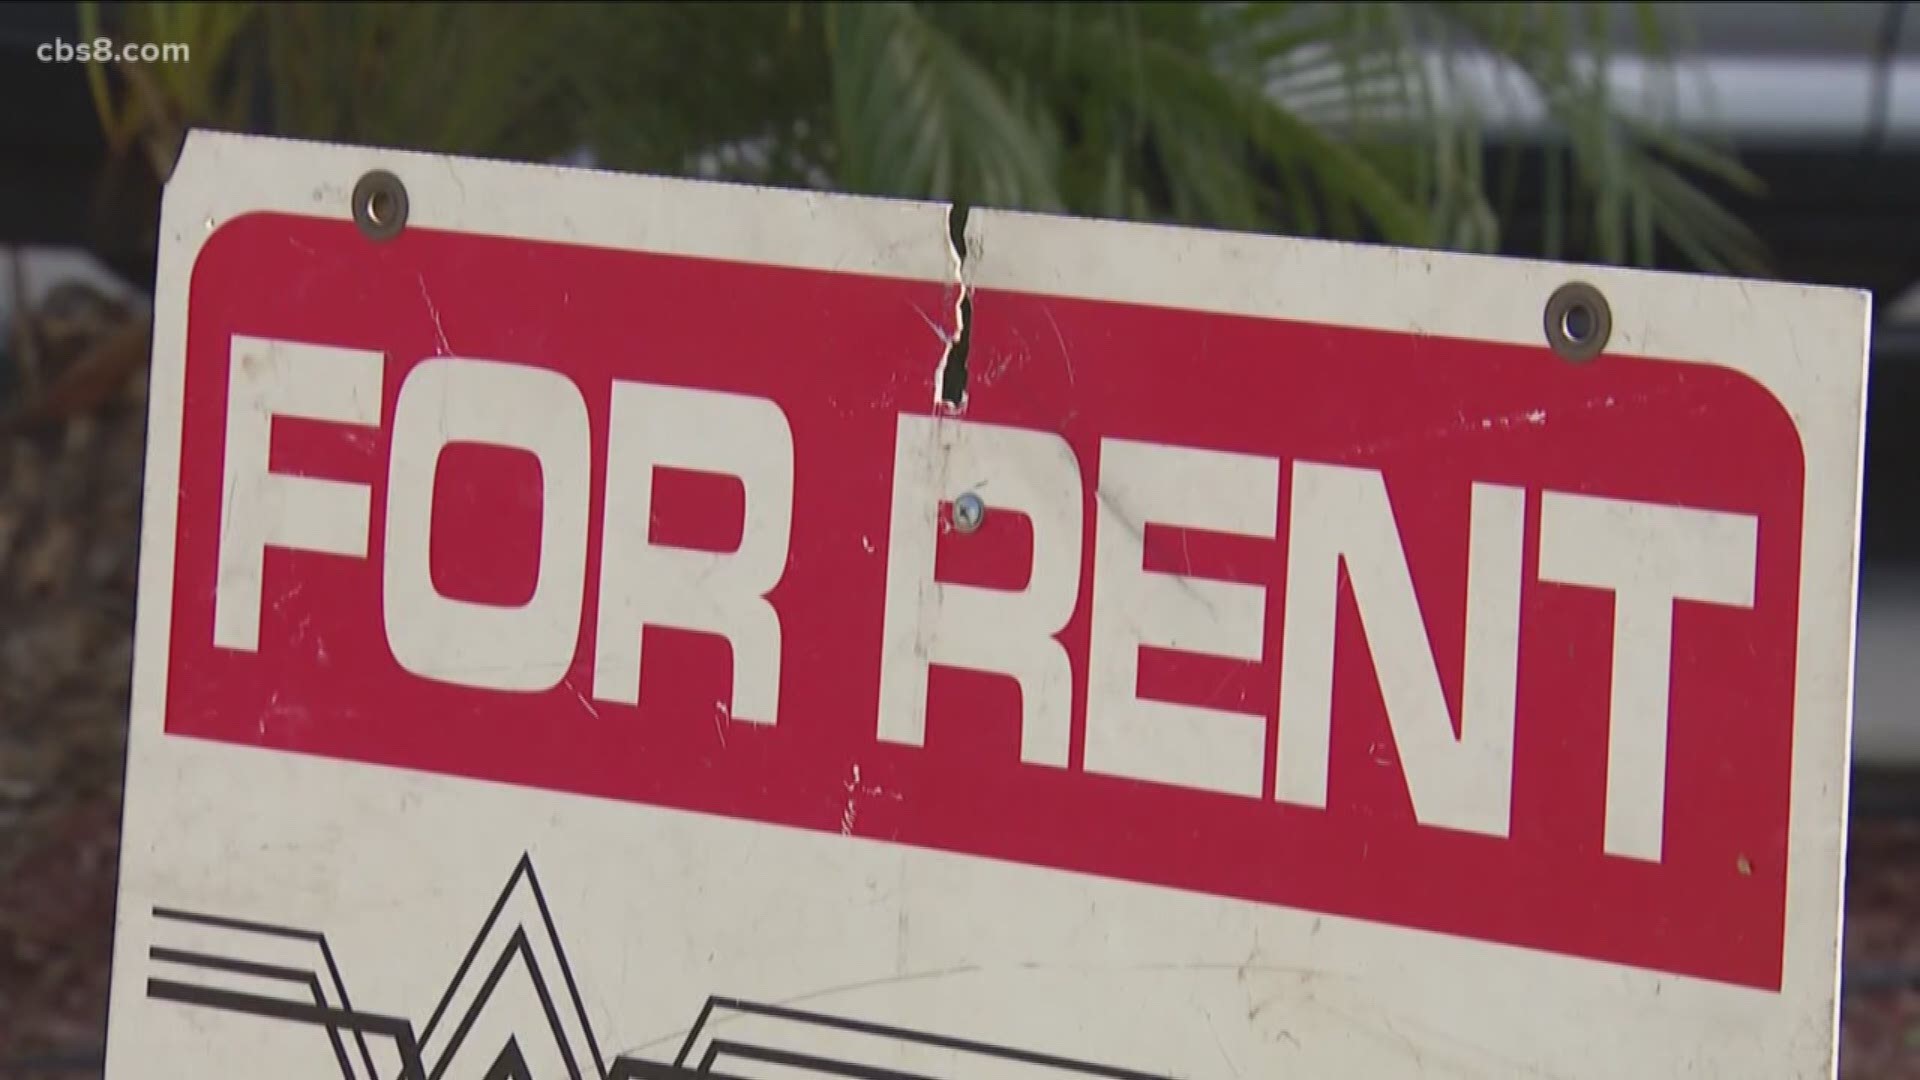 The City of San Diego has an eviction moratorium in place, but renters are not automatically protected. It requires tenants to take action before or by April 1.